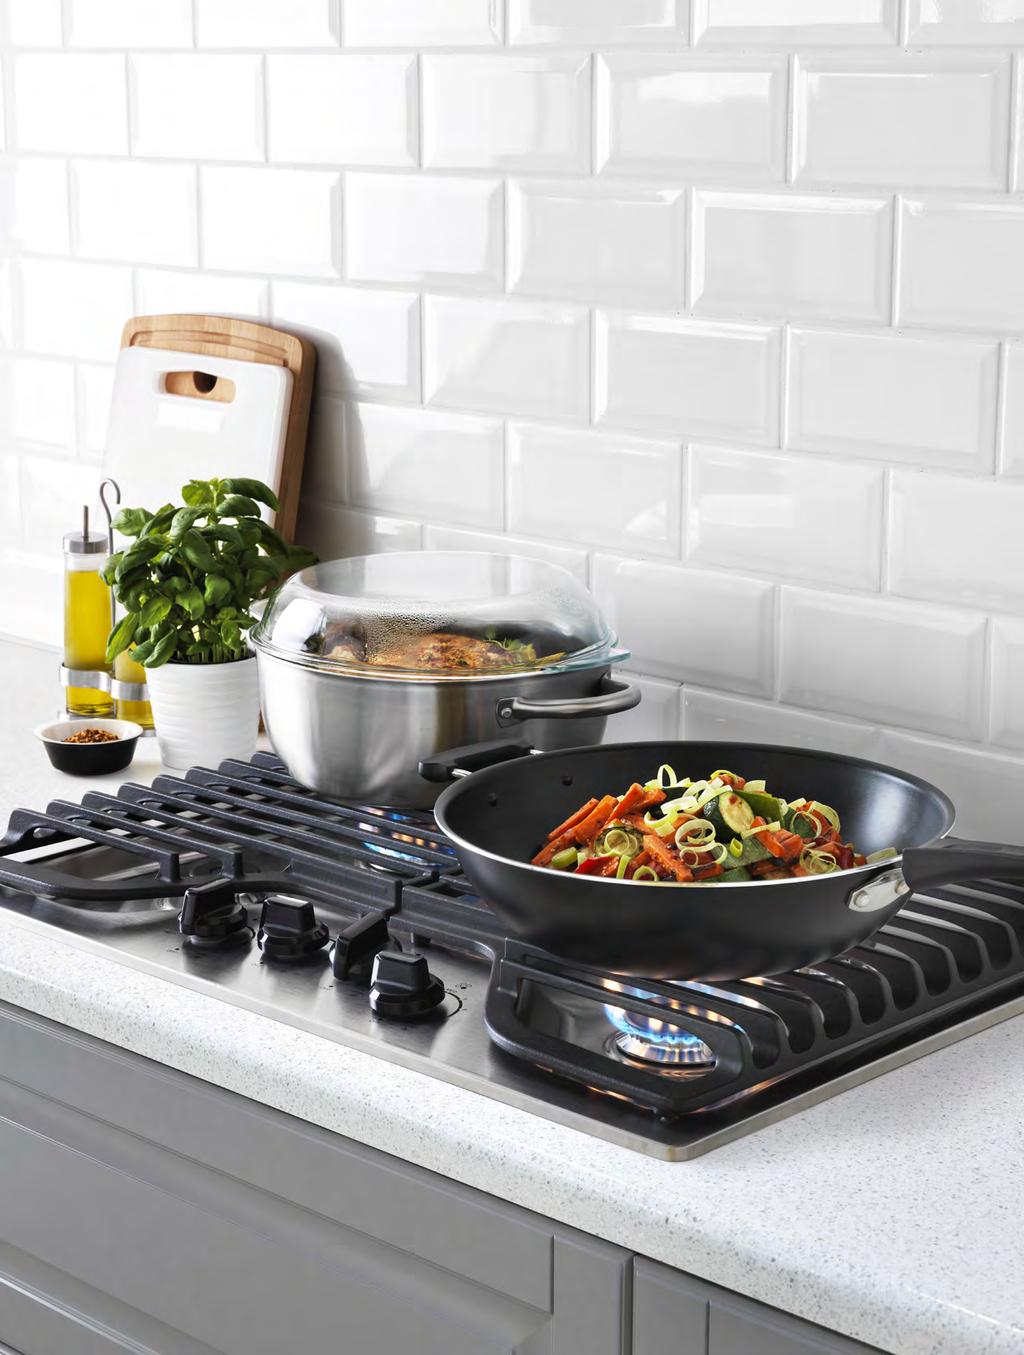 COOKTOPS We have a variety of cooktops to choose from, so you can find the one that suits the way you cook. Each type gas, glass ceramic and induction has its own unique benefits and features.